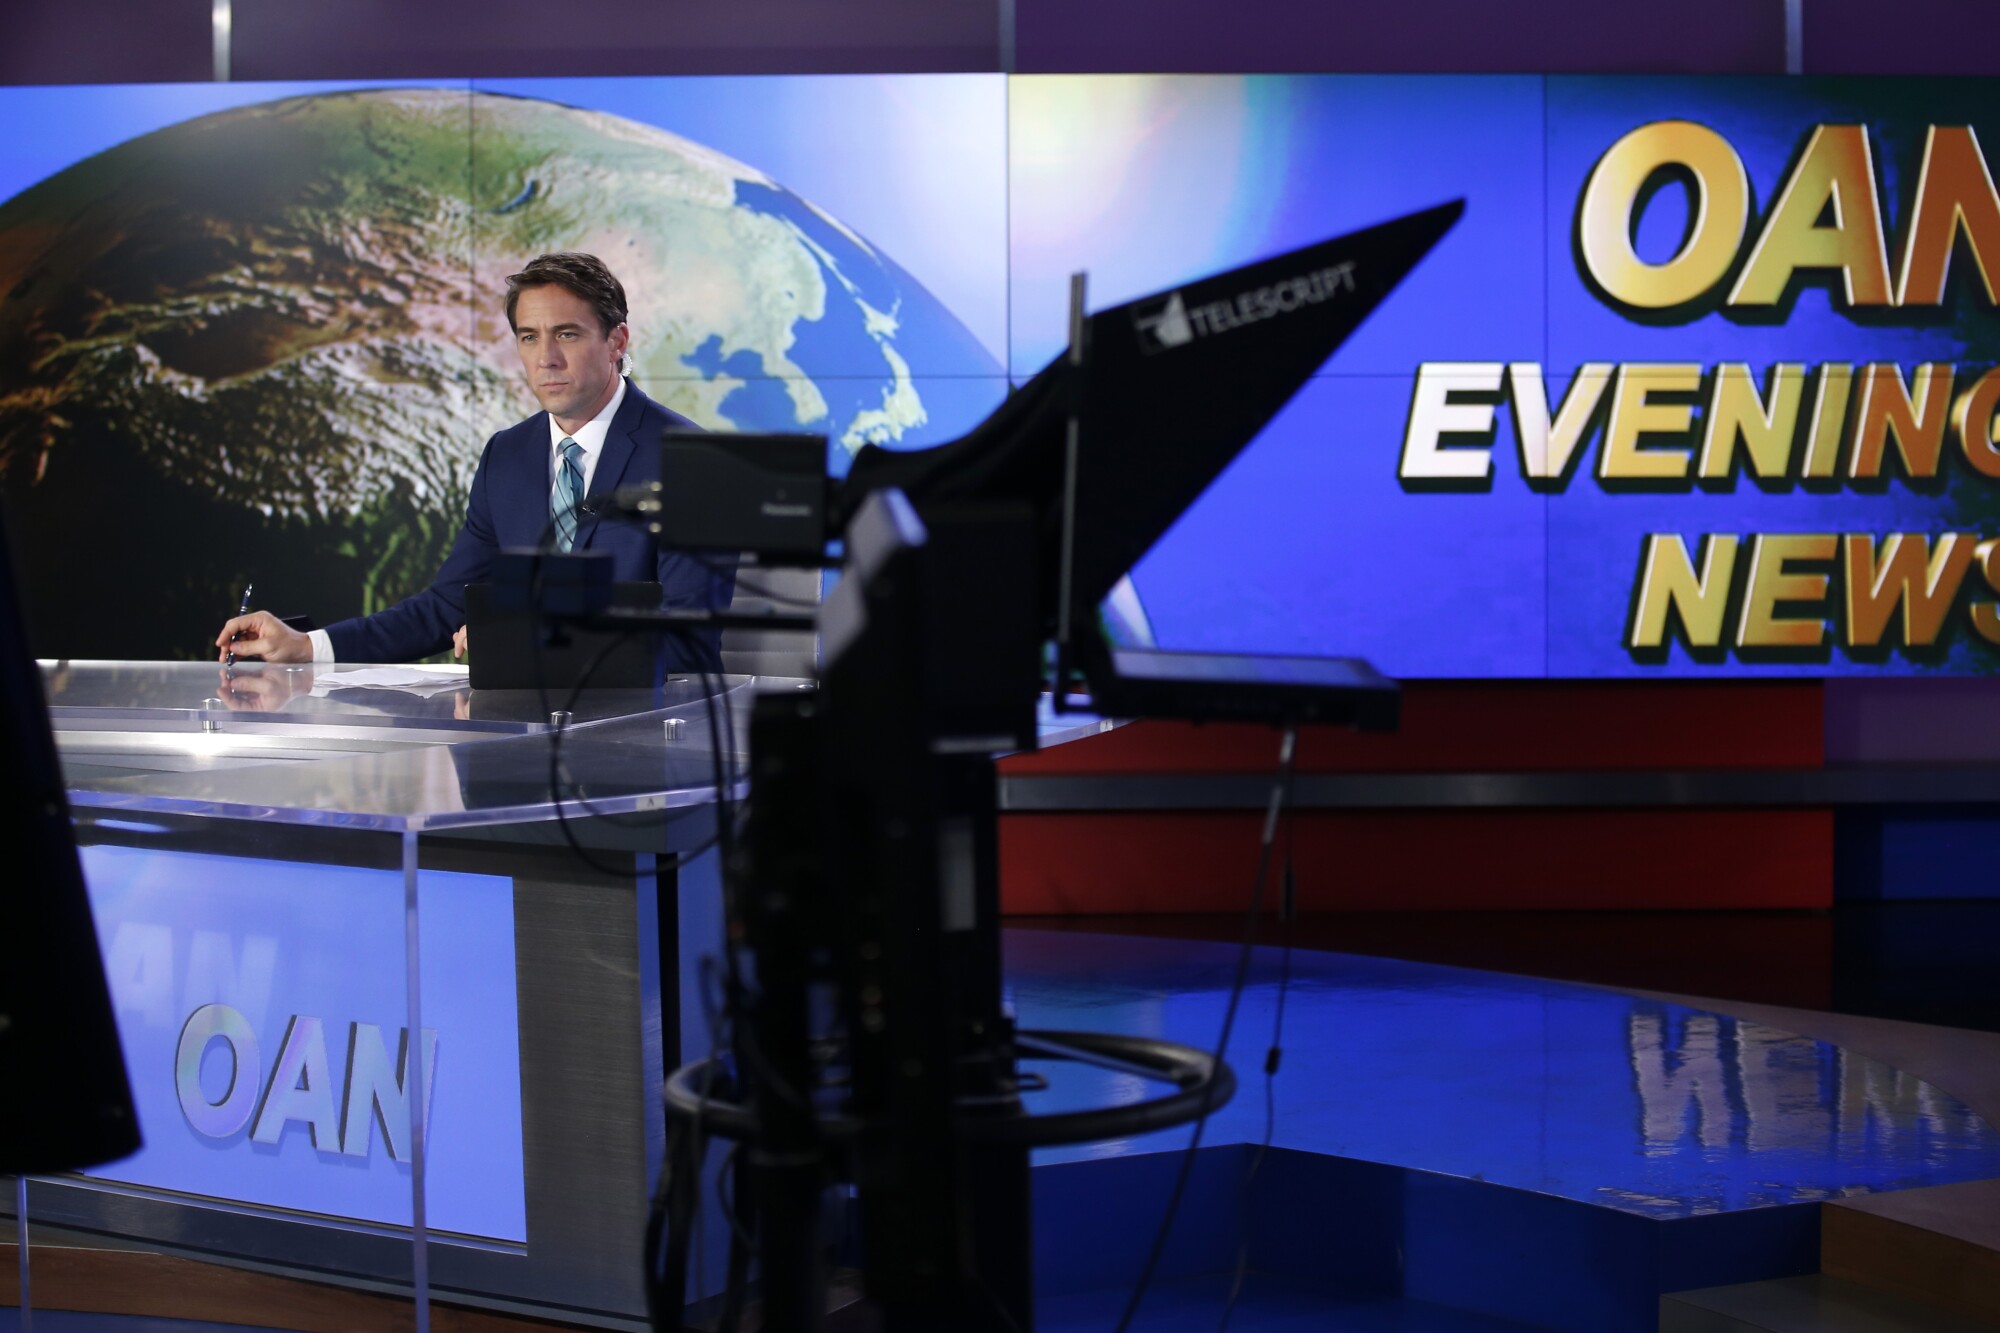 Patrick Hussion waits for a break while hosting an evening news segment at San Diego-based One America News on Sept. 5, 2019.